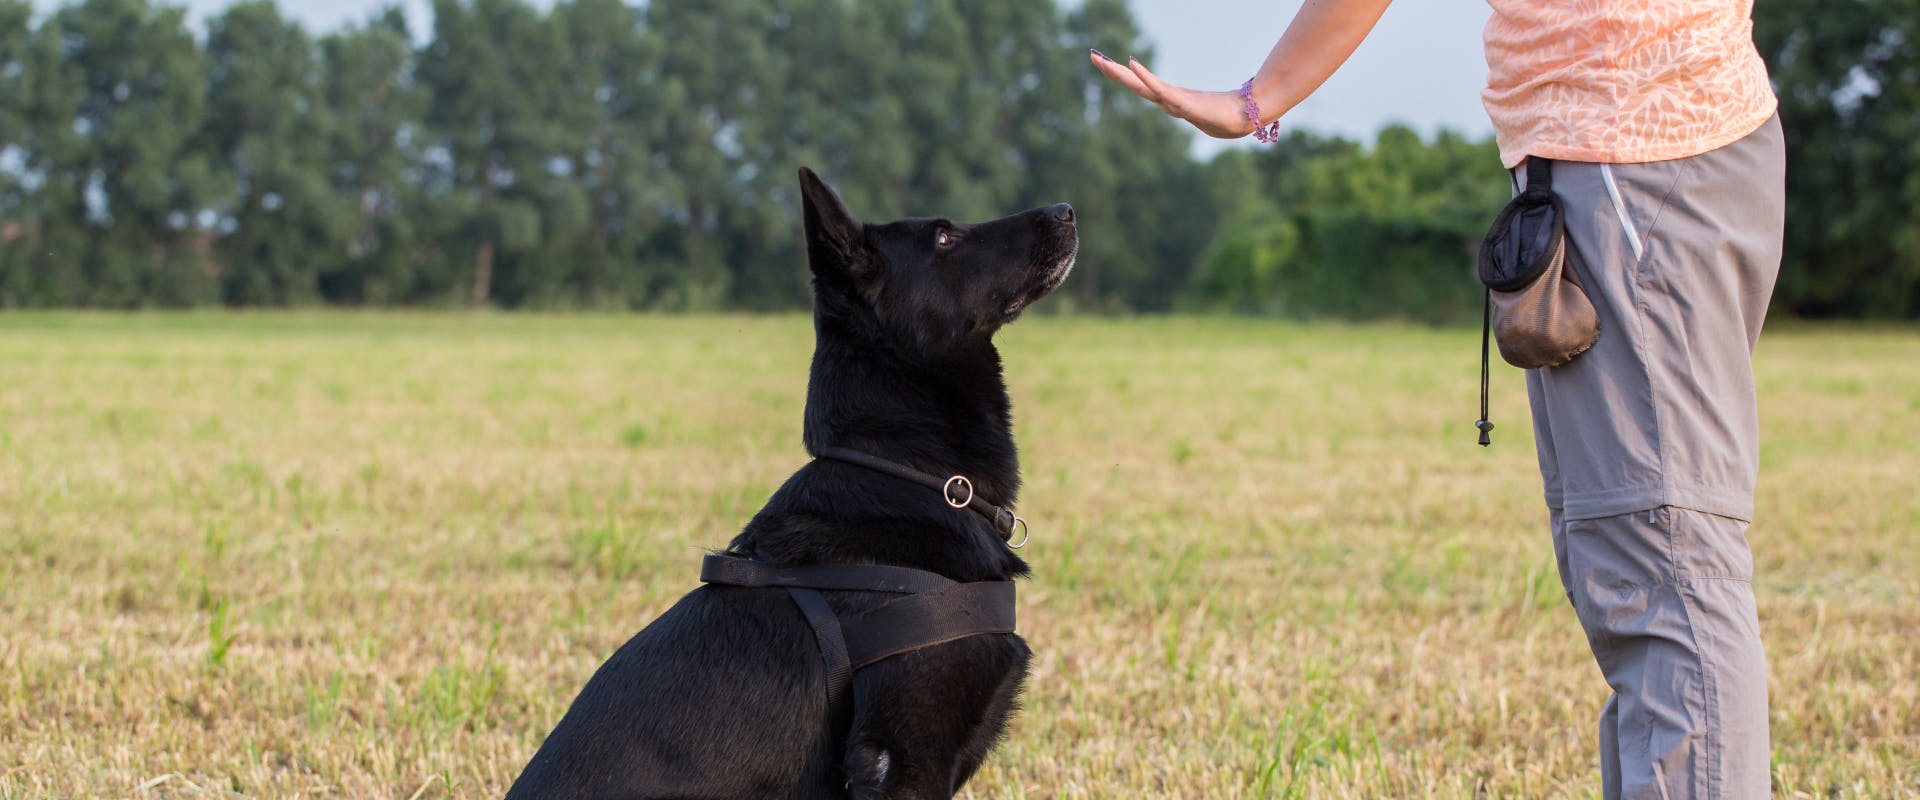 Black dog sitting and being told to wait by a dog trainer